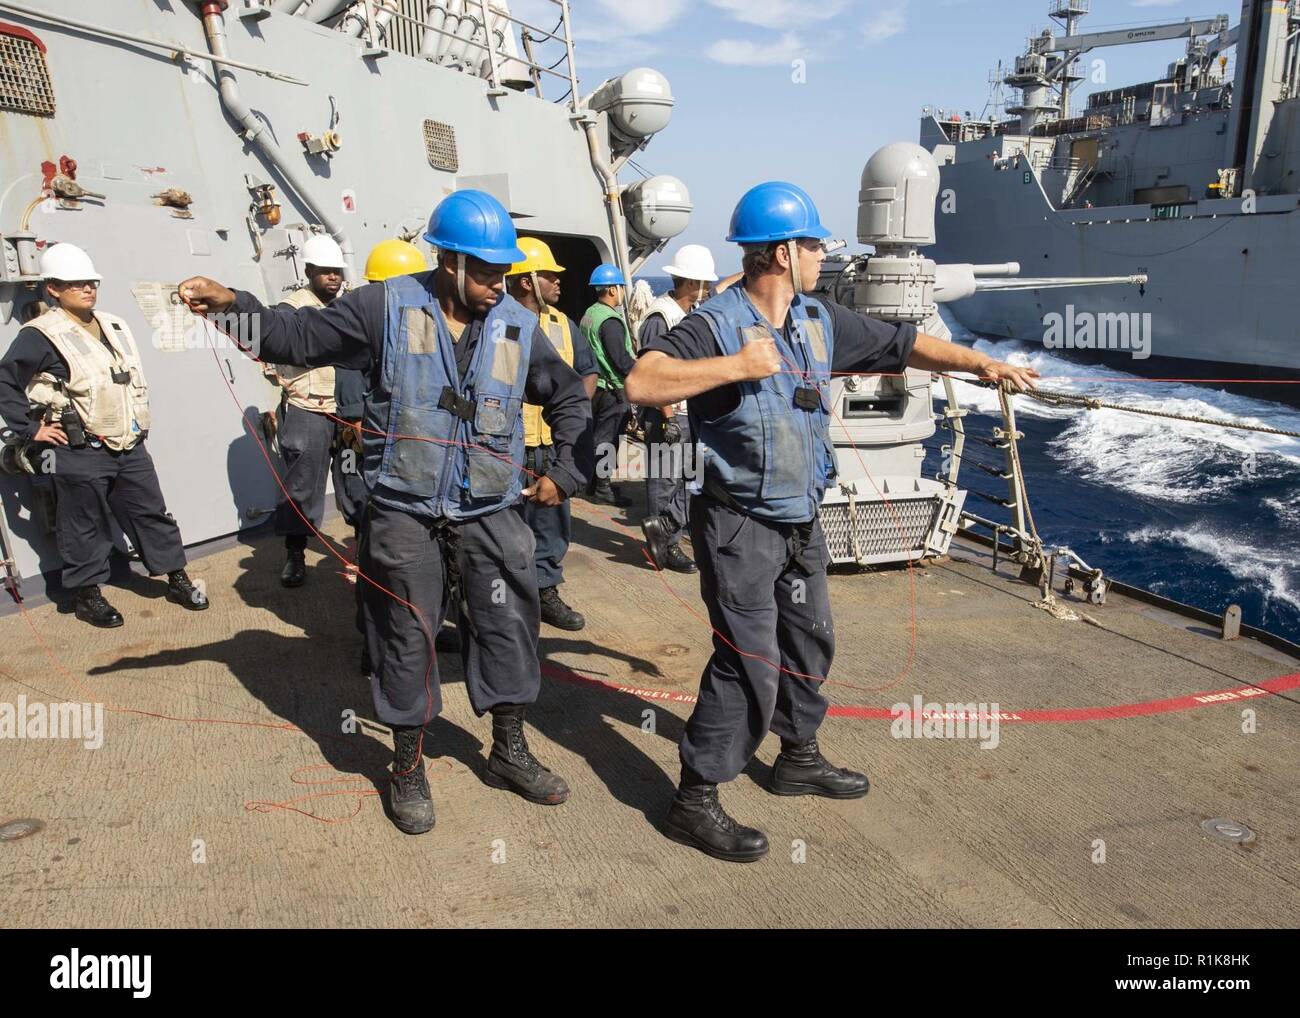 MEDITERRANEAN SEA (Oct. 6, 2018) Sailors heave a shot line aboard the Arleigh Burke-class guided-missile destroyer USS Arleigh Burke (DDG 51) during a replenishment-at-sea with the dry cargo and ammunition ship USNS Medgar Evers (T-AKE 13) in the Mediterranean Sea Oct. 6, 2018. Arleigh Burke, homeported at Naval Station Norfolk, is conducting naval operations in the U.S. 6th Fleet area of operations in support of U.S. national security interests in Europe and Africa. Stock Photo